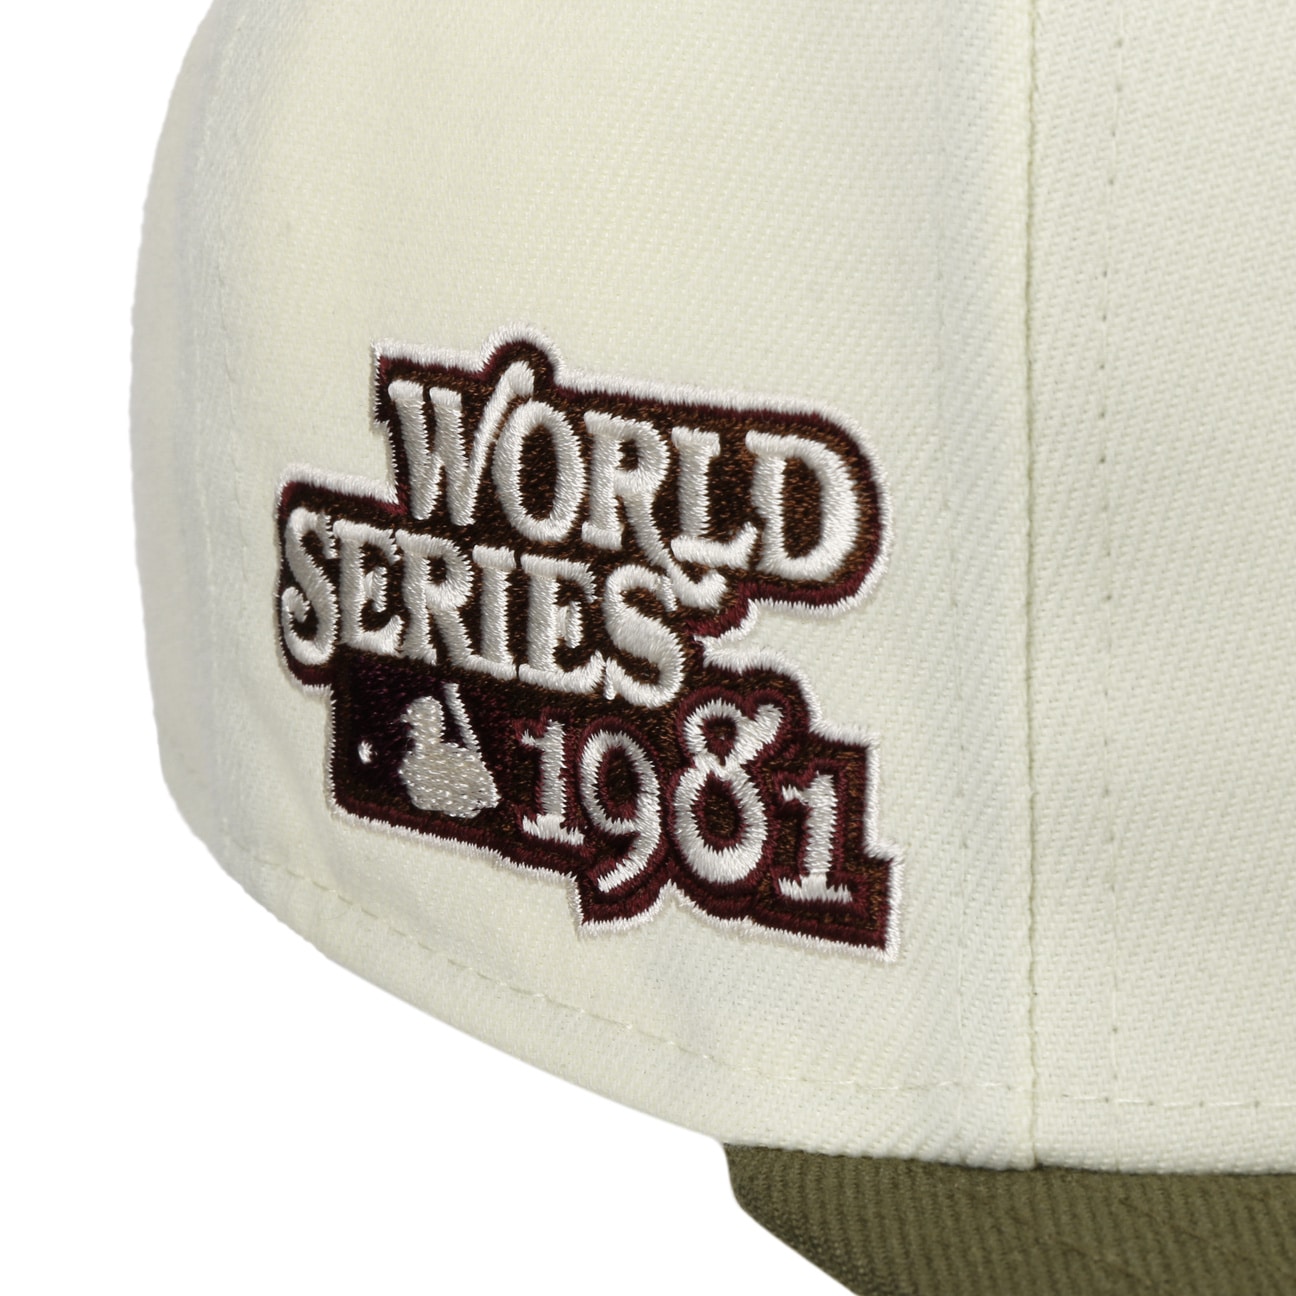 LA Dodgers MLB World Series Trail Mix White 59FIFTY Fitted Cap